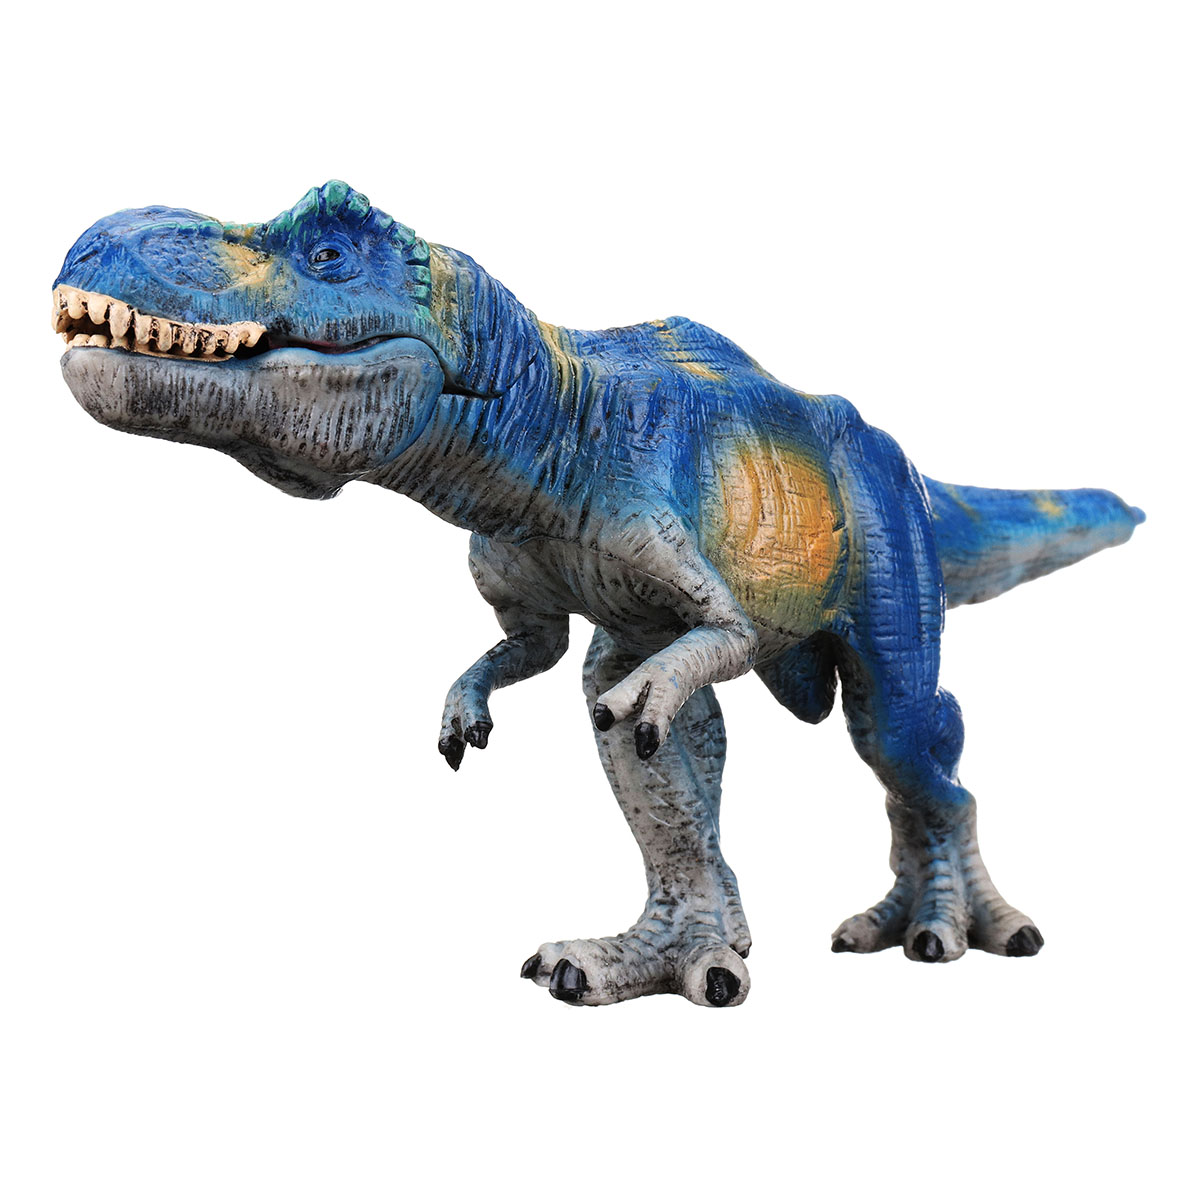 Kid's Blue T-Rex Dinosaur Action Figure Science Toy Collectible Home Decor 